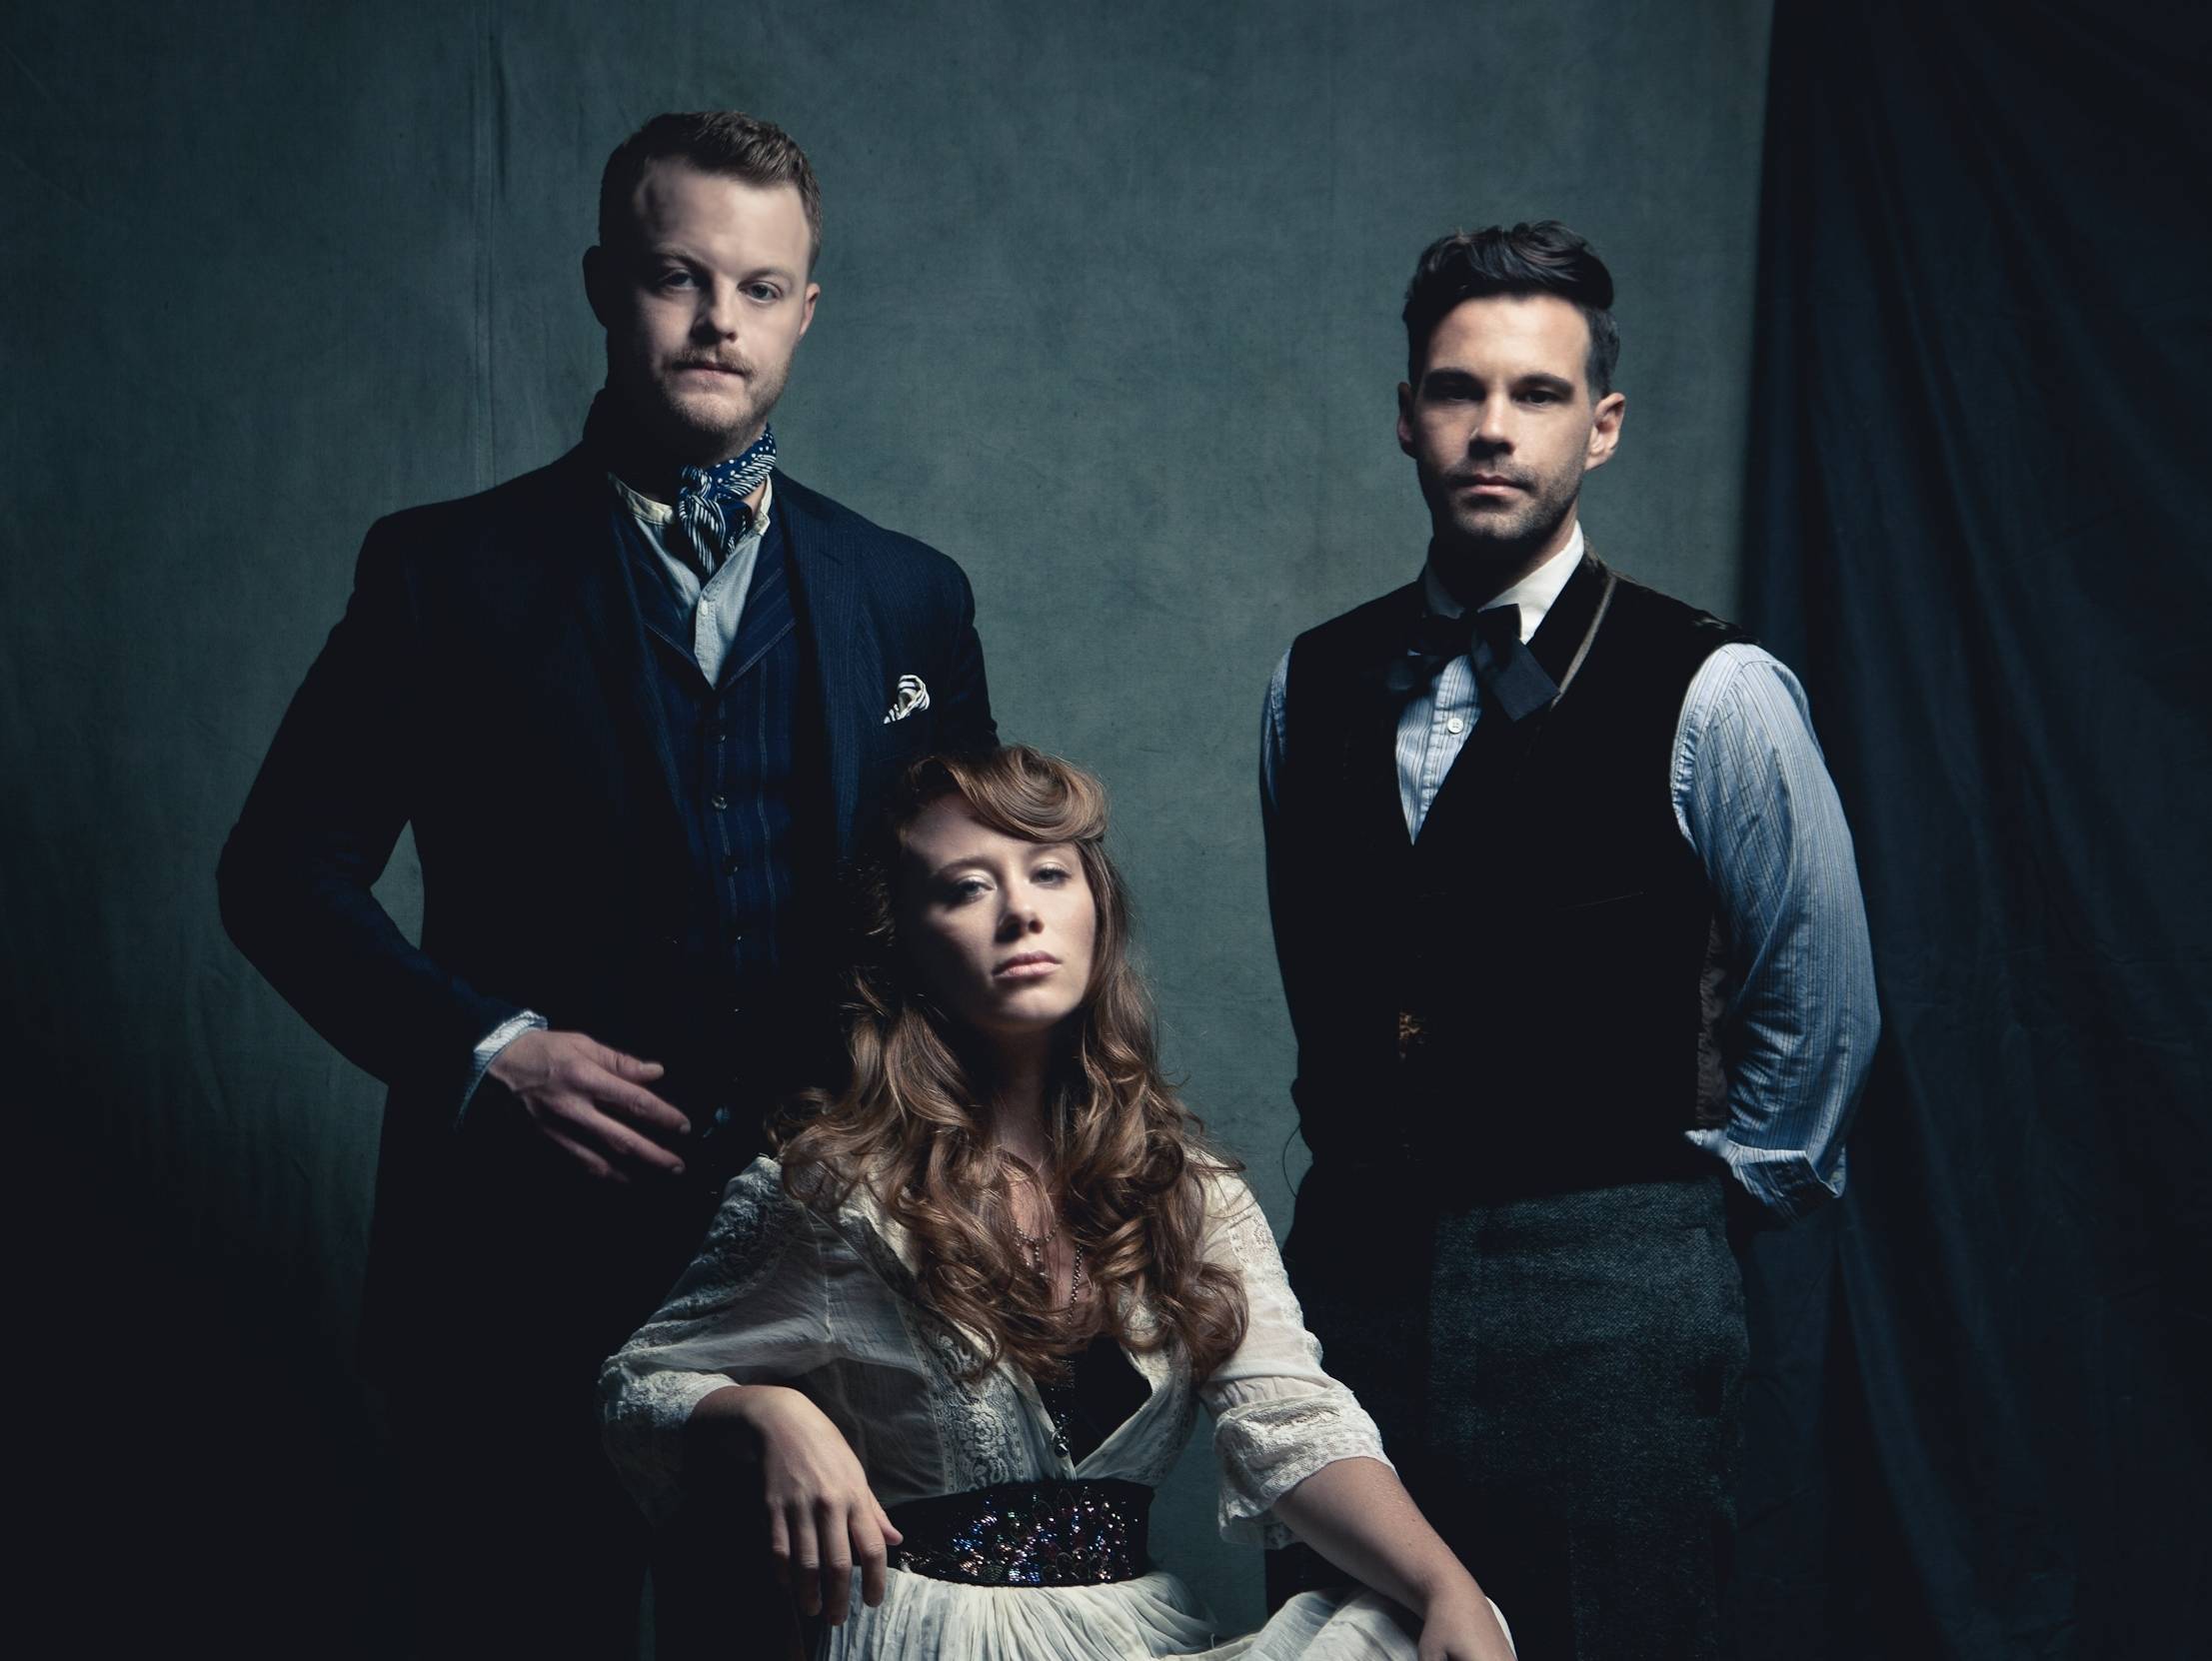 Onwards to morning with The Lone Bellow